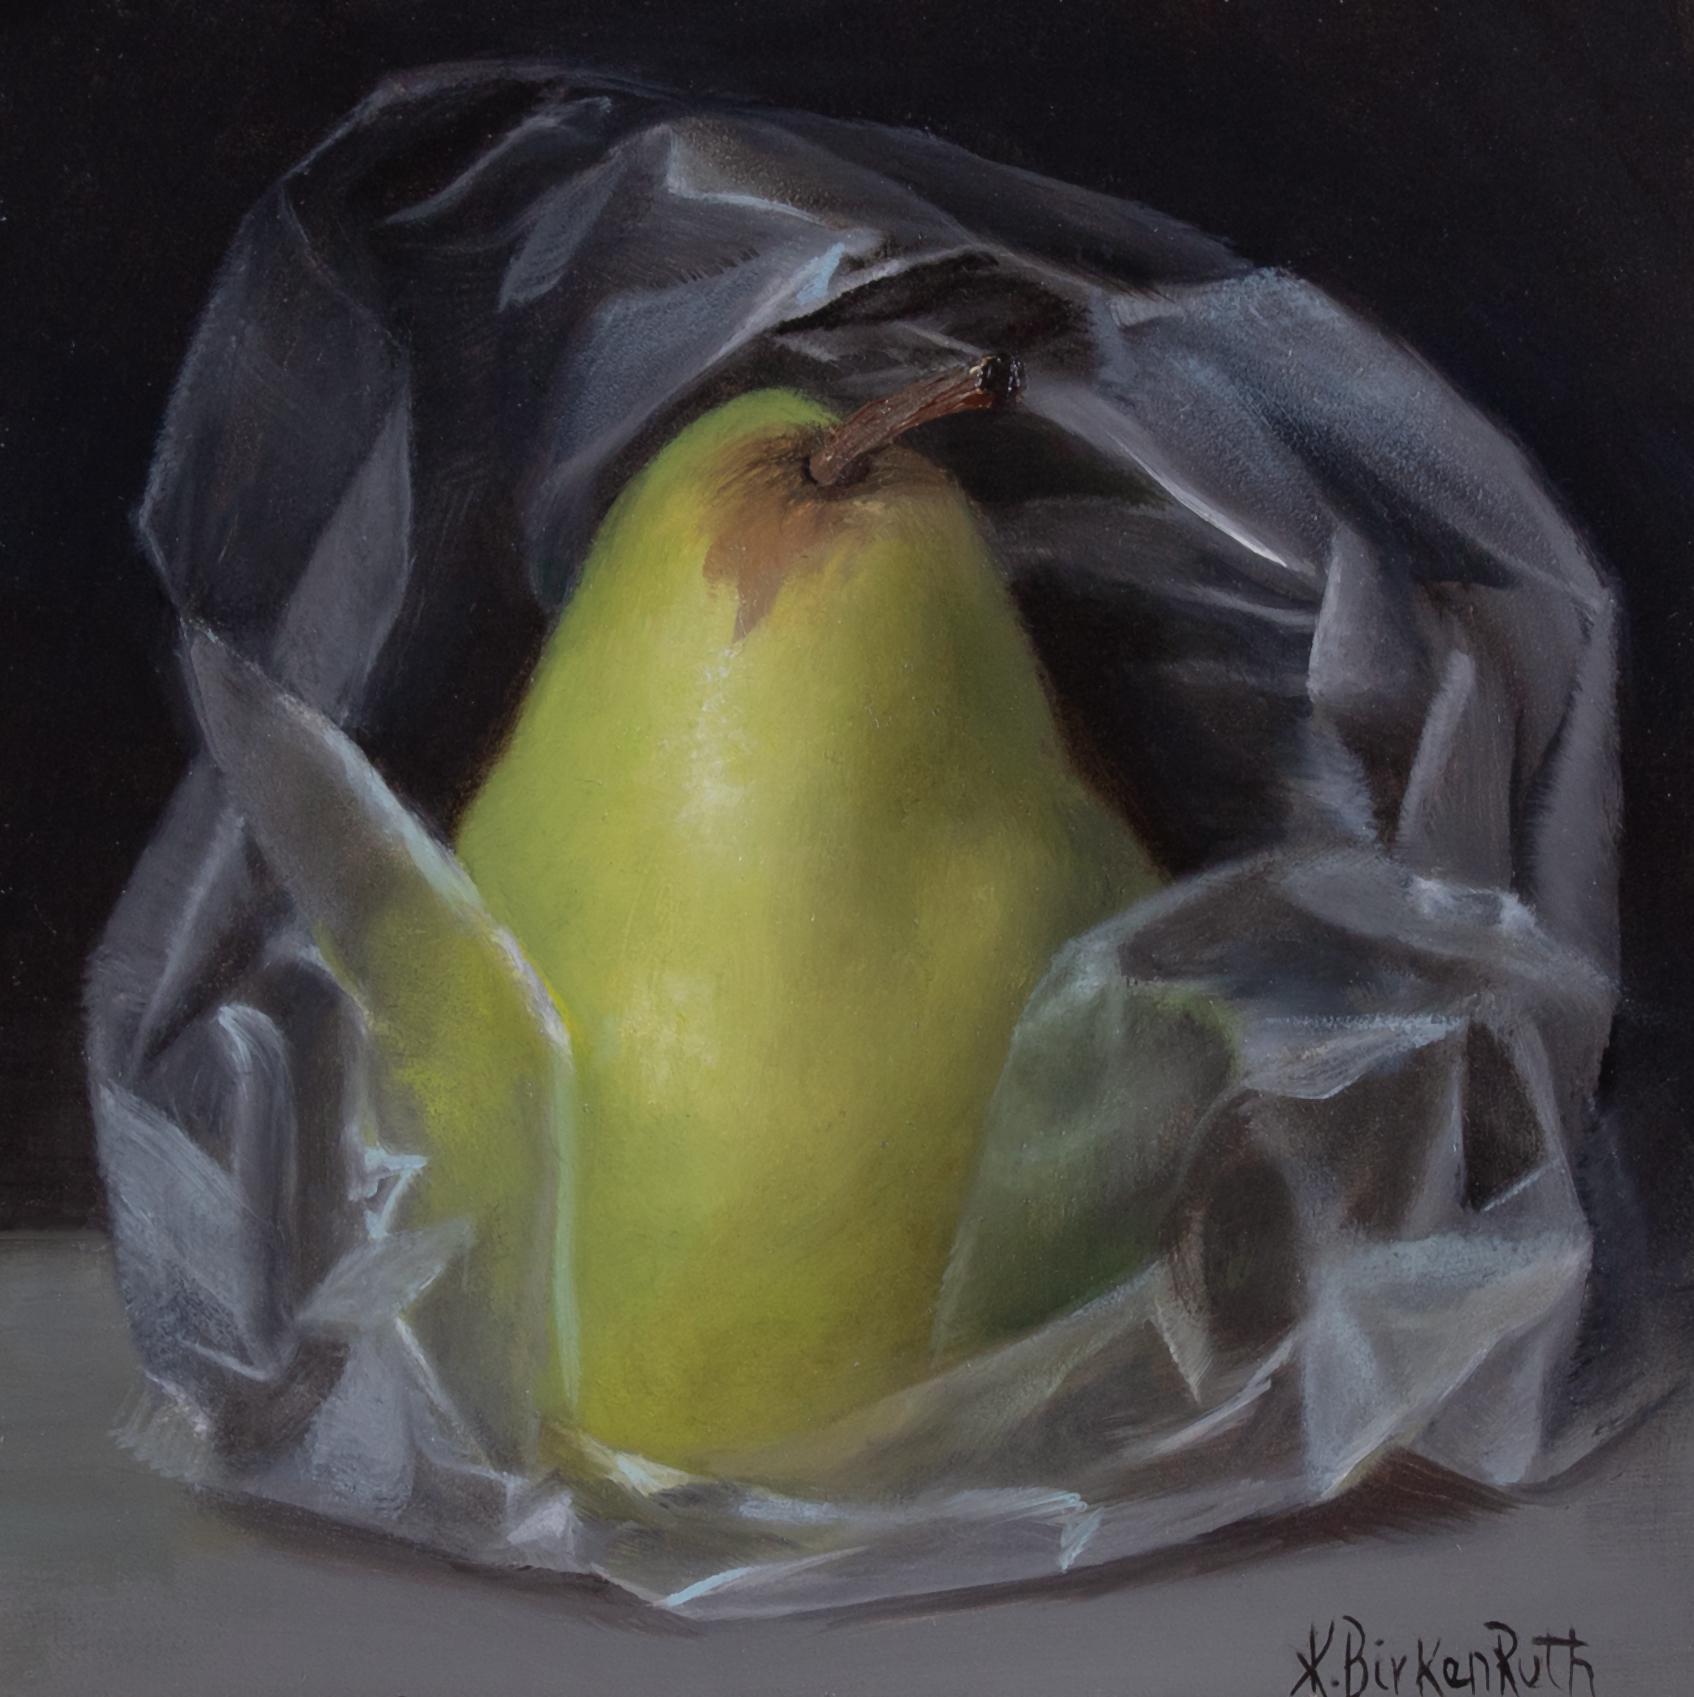 Kelly Birkenruth's "Pear Wrapped in Plastic" (2023) is an original oil painting on panel, measuring 5 x 5 x 1 inches. This exquisite still life features a pear enveloped in a delicate plastic sheet, highlighting Birkenruth's exceptional attention to